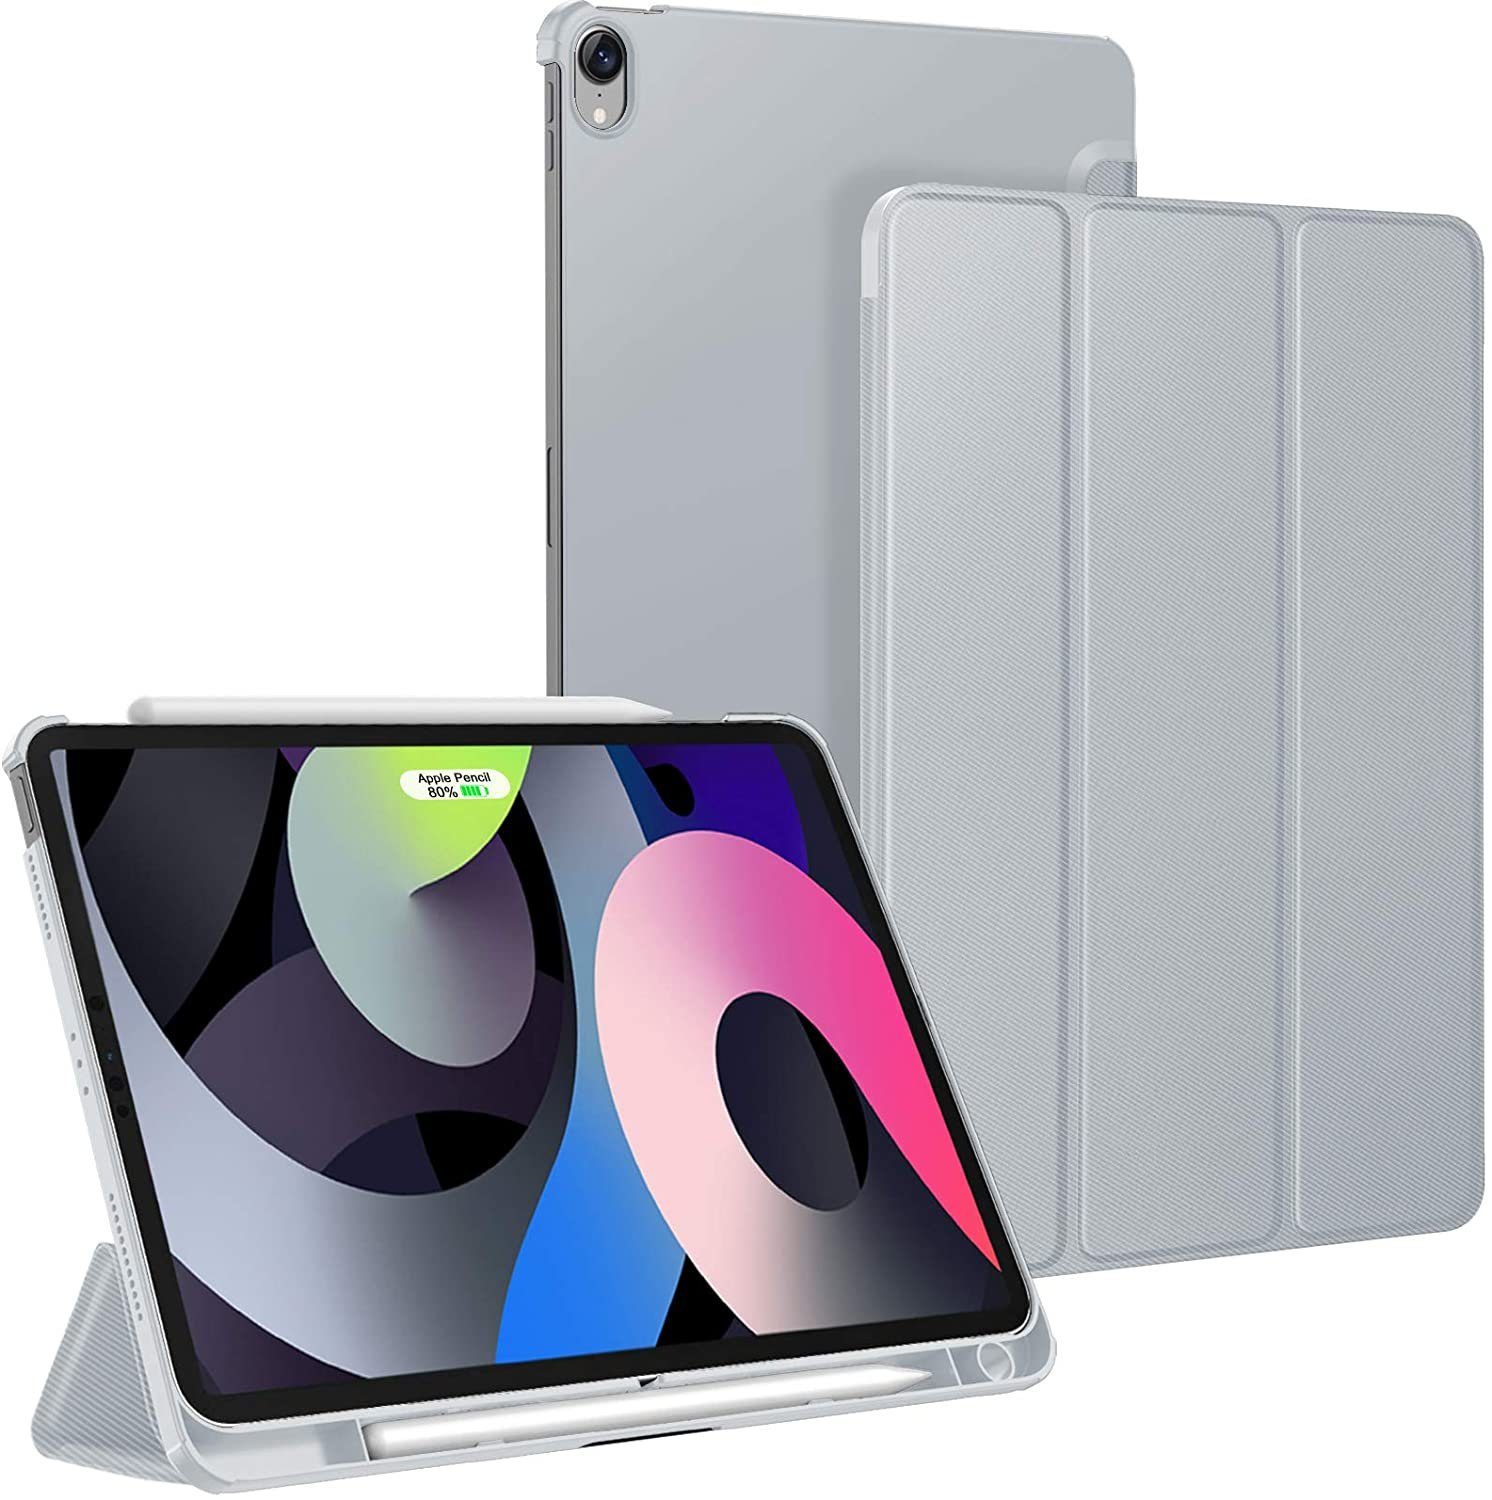 IVSO Tablet-Hülle »Tablet Hülle für iPad Air 5/iPad Air 4 Hülle, für iPad  Air 5/iPad Air 4 10.9" Hülle, Schutzhülle für iPad Air 5th Generation 2022/ iPad Air 4th Generation 2020, Cover Case